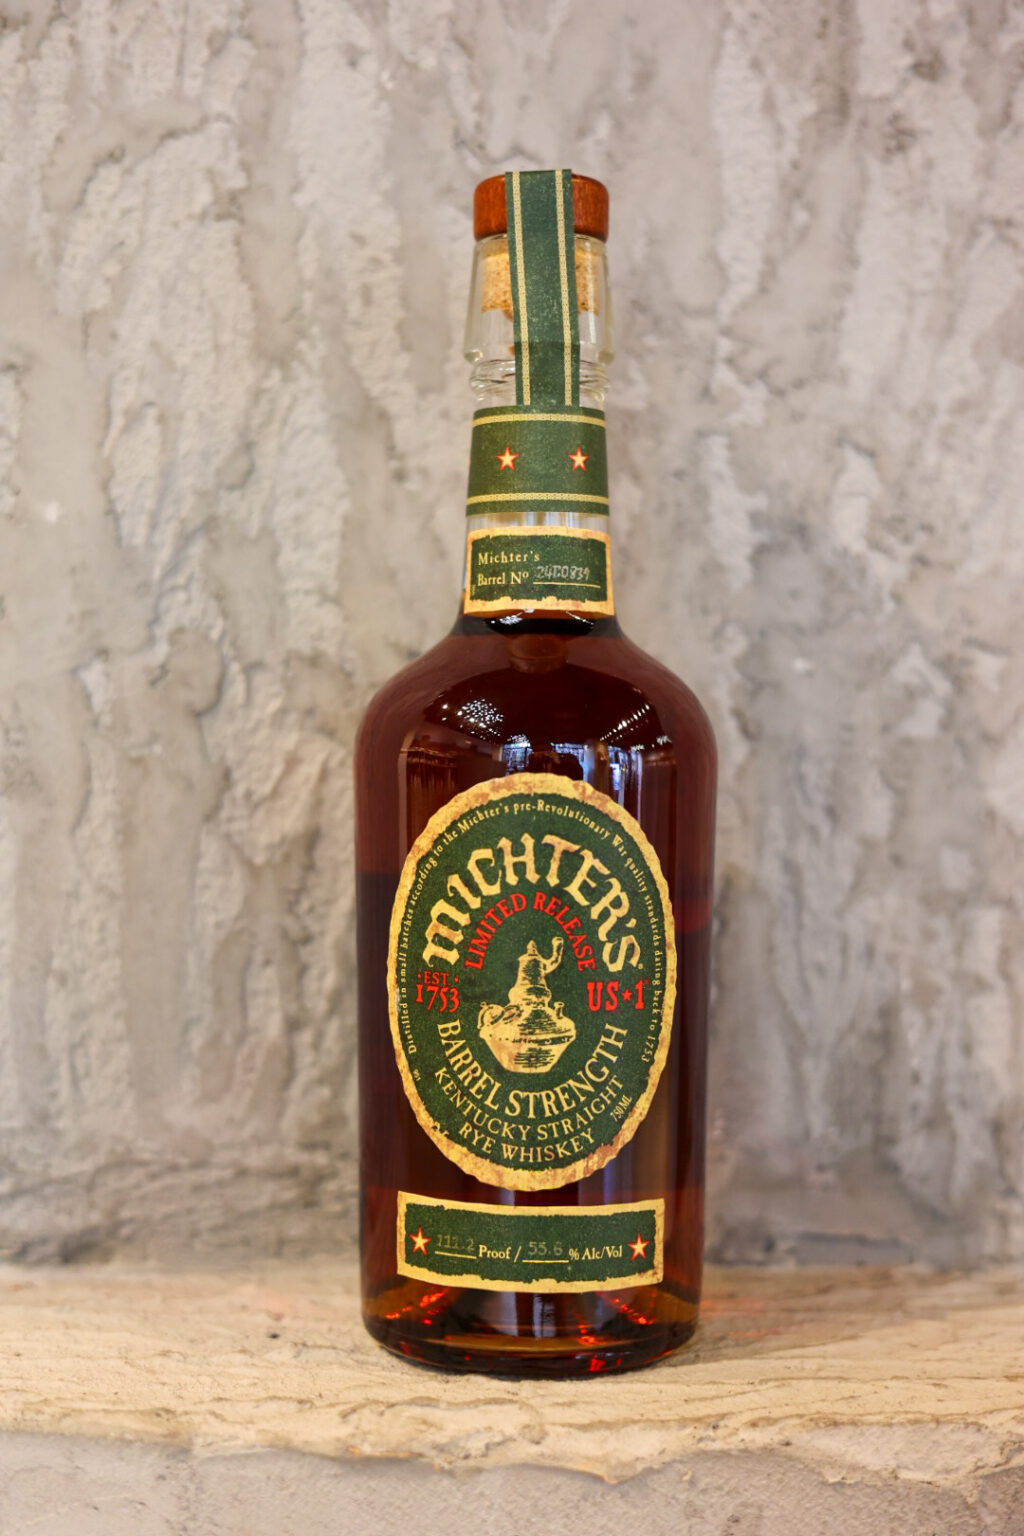 Michter’s US 1 Limited Release Barrel Strength Kentucky Straight Rye Whiskey